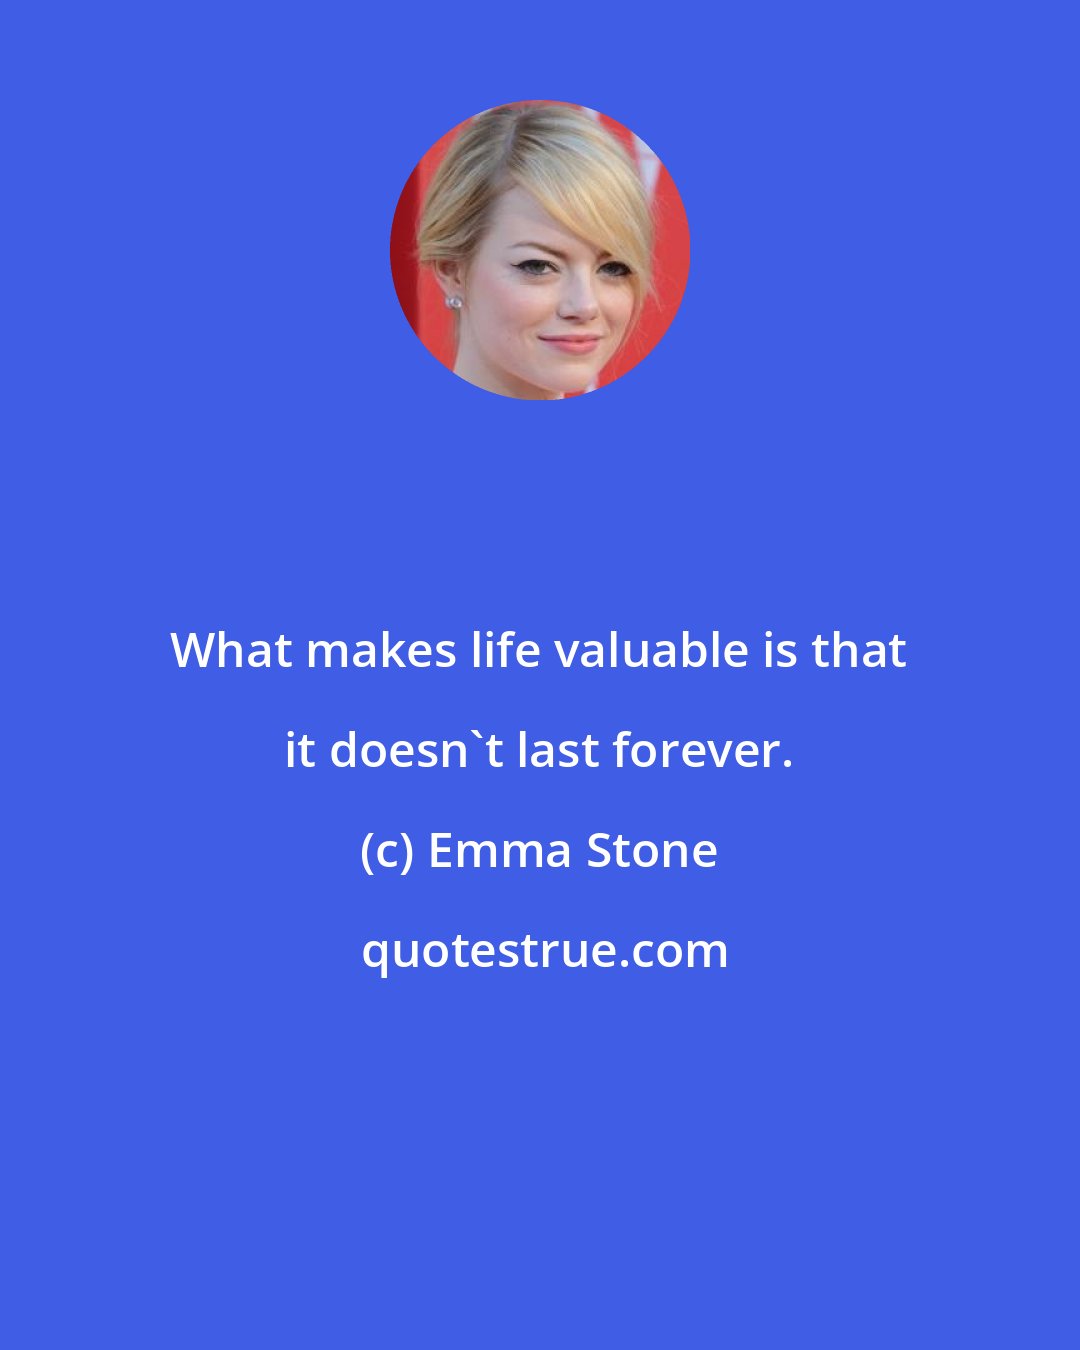 Emma Stone: What makes life valuable is that it doesn't last forever.